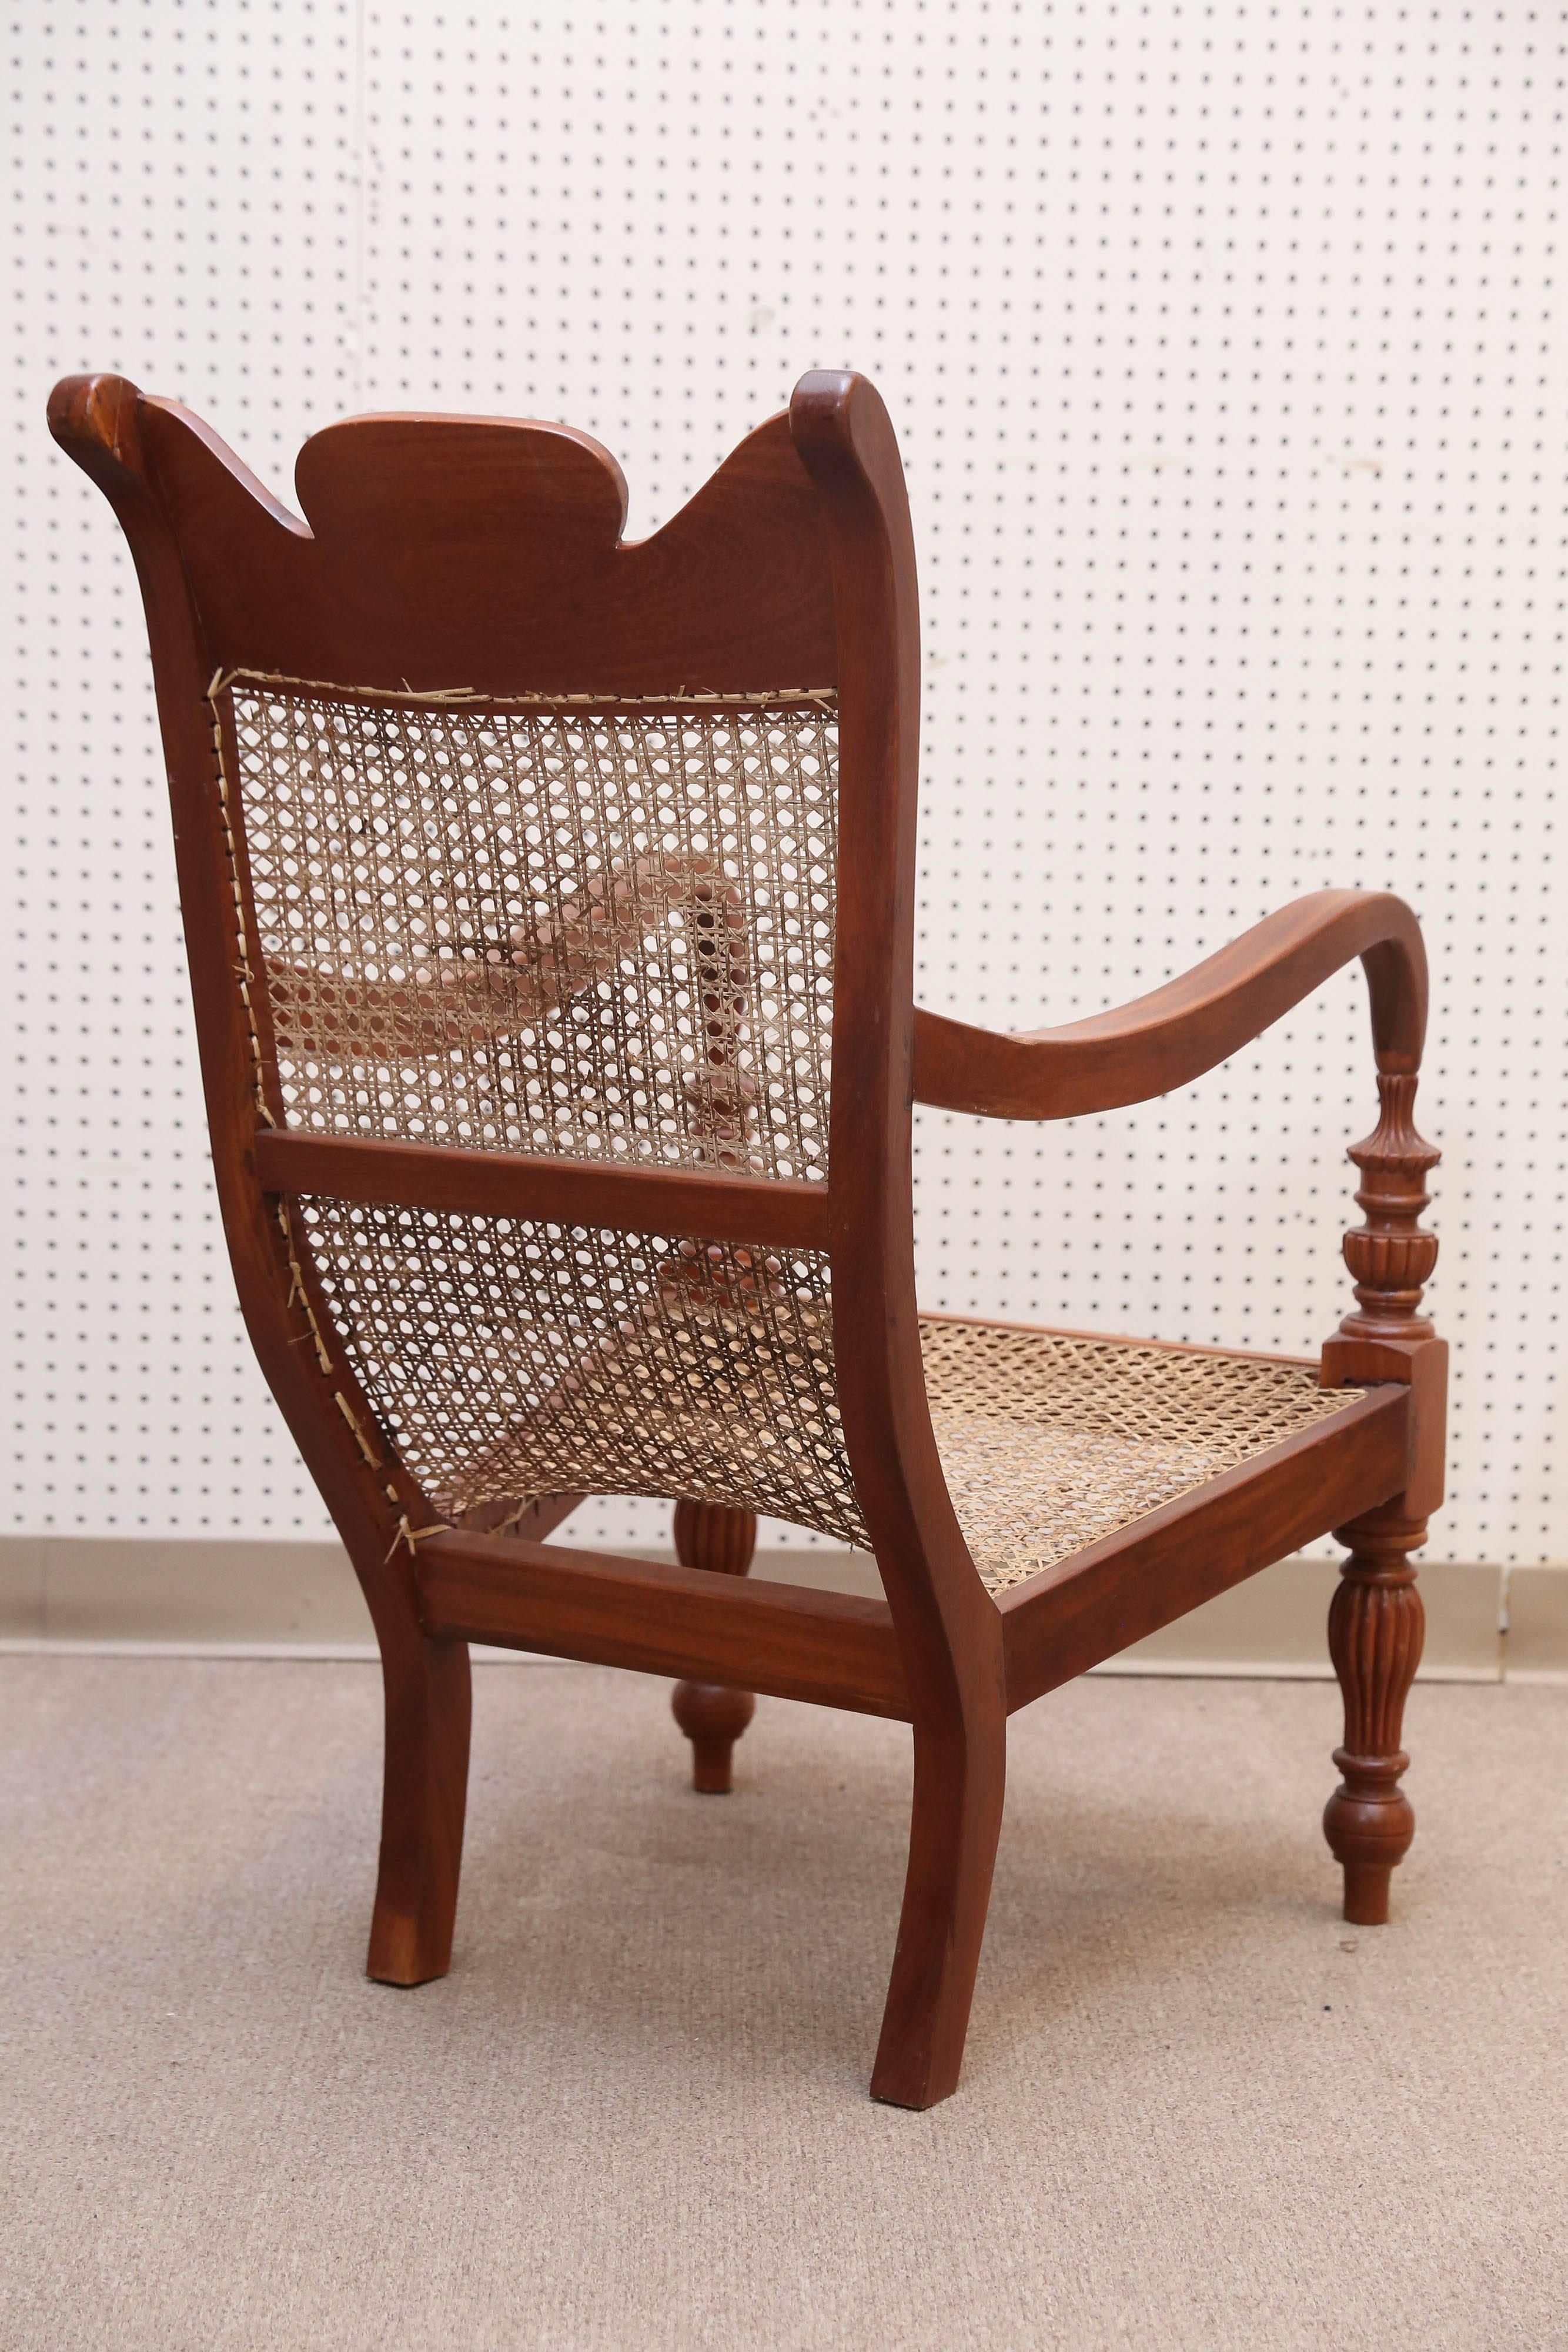 Anglo Raj Set of Four Teak Wood and Cane Lounge Chairs from Colombo Area of Sri Lanka For Sale